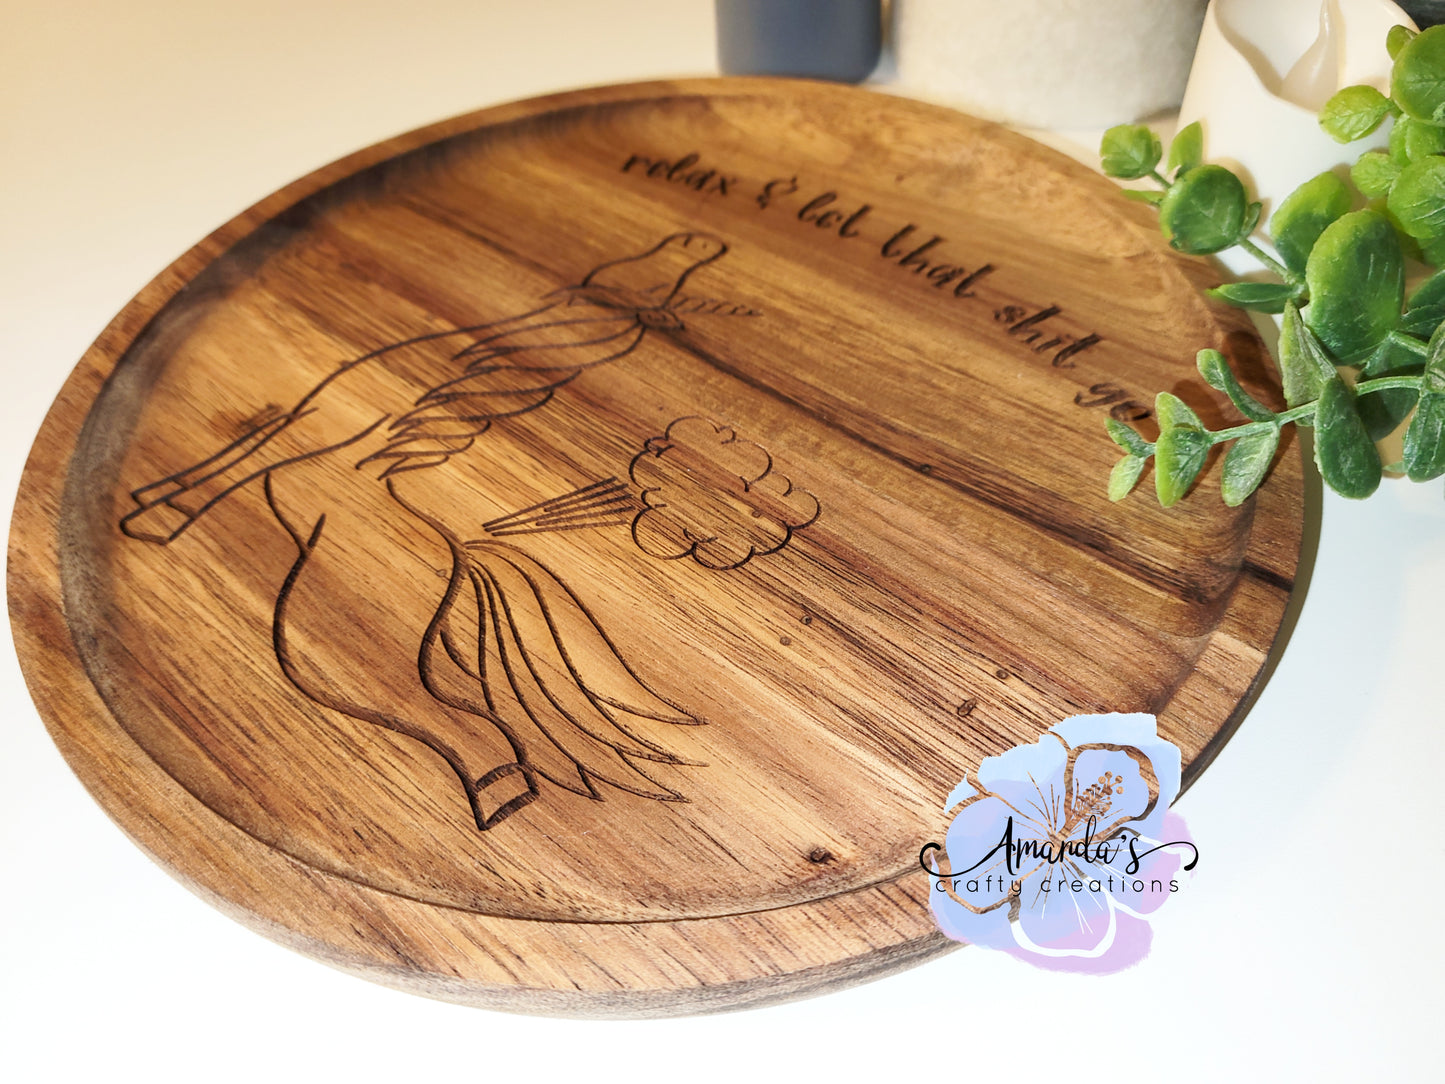 "Relax and Let it Go" Engarved Acacia Wood Round, Acacia wood dish, Shallow dish, engraved ring dish, key dish, decor